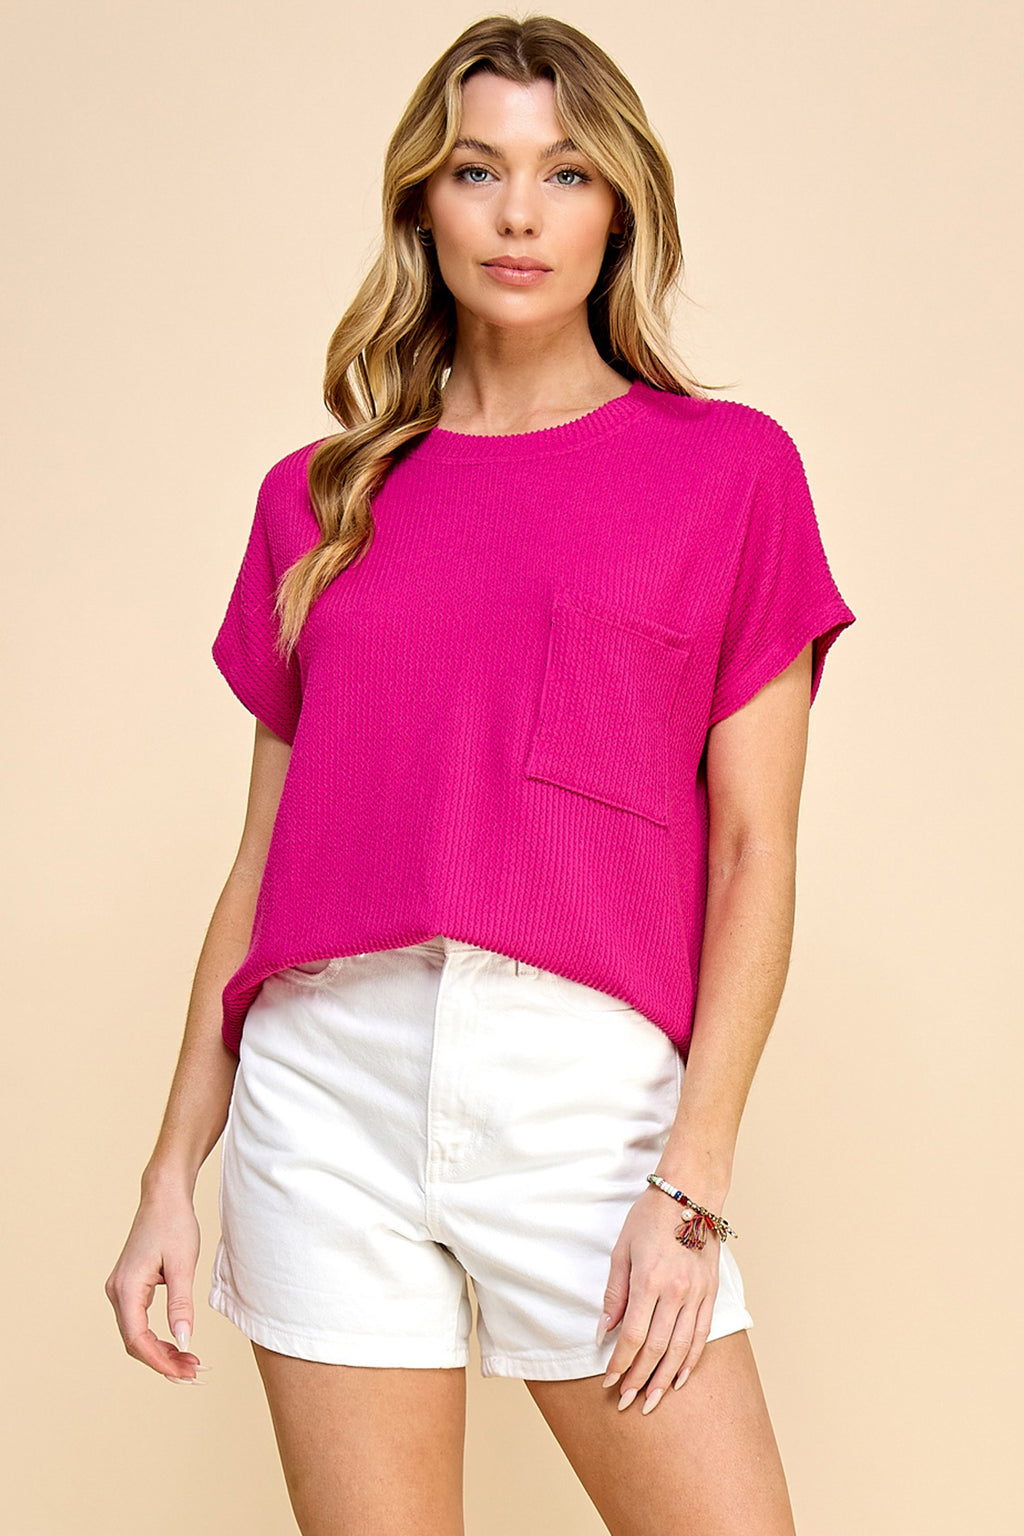 Les Amis Solid Ribbed Top with Pockets Blouse Les Amis Magenta Small 